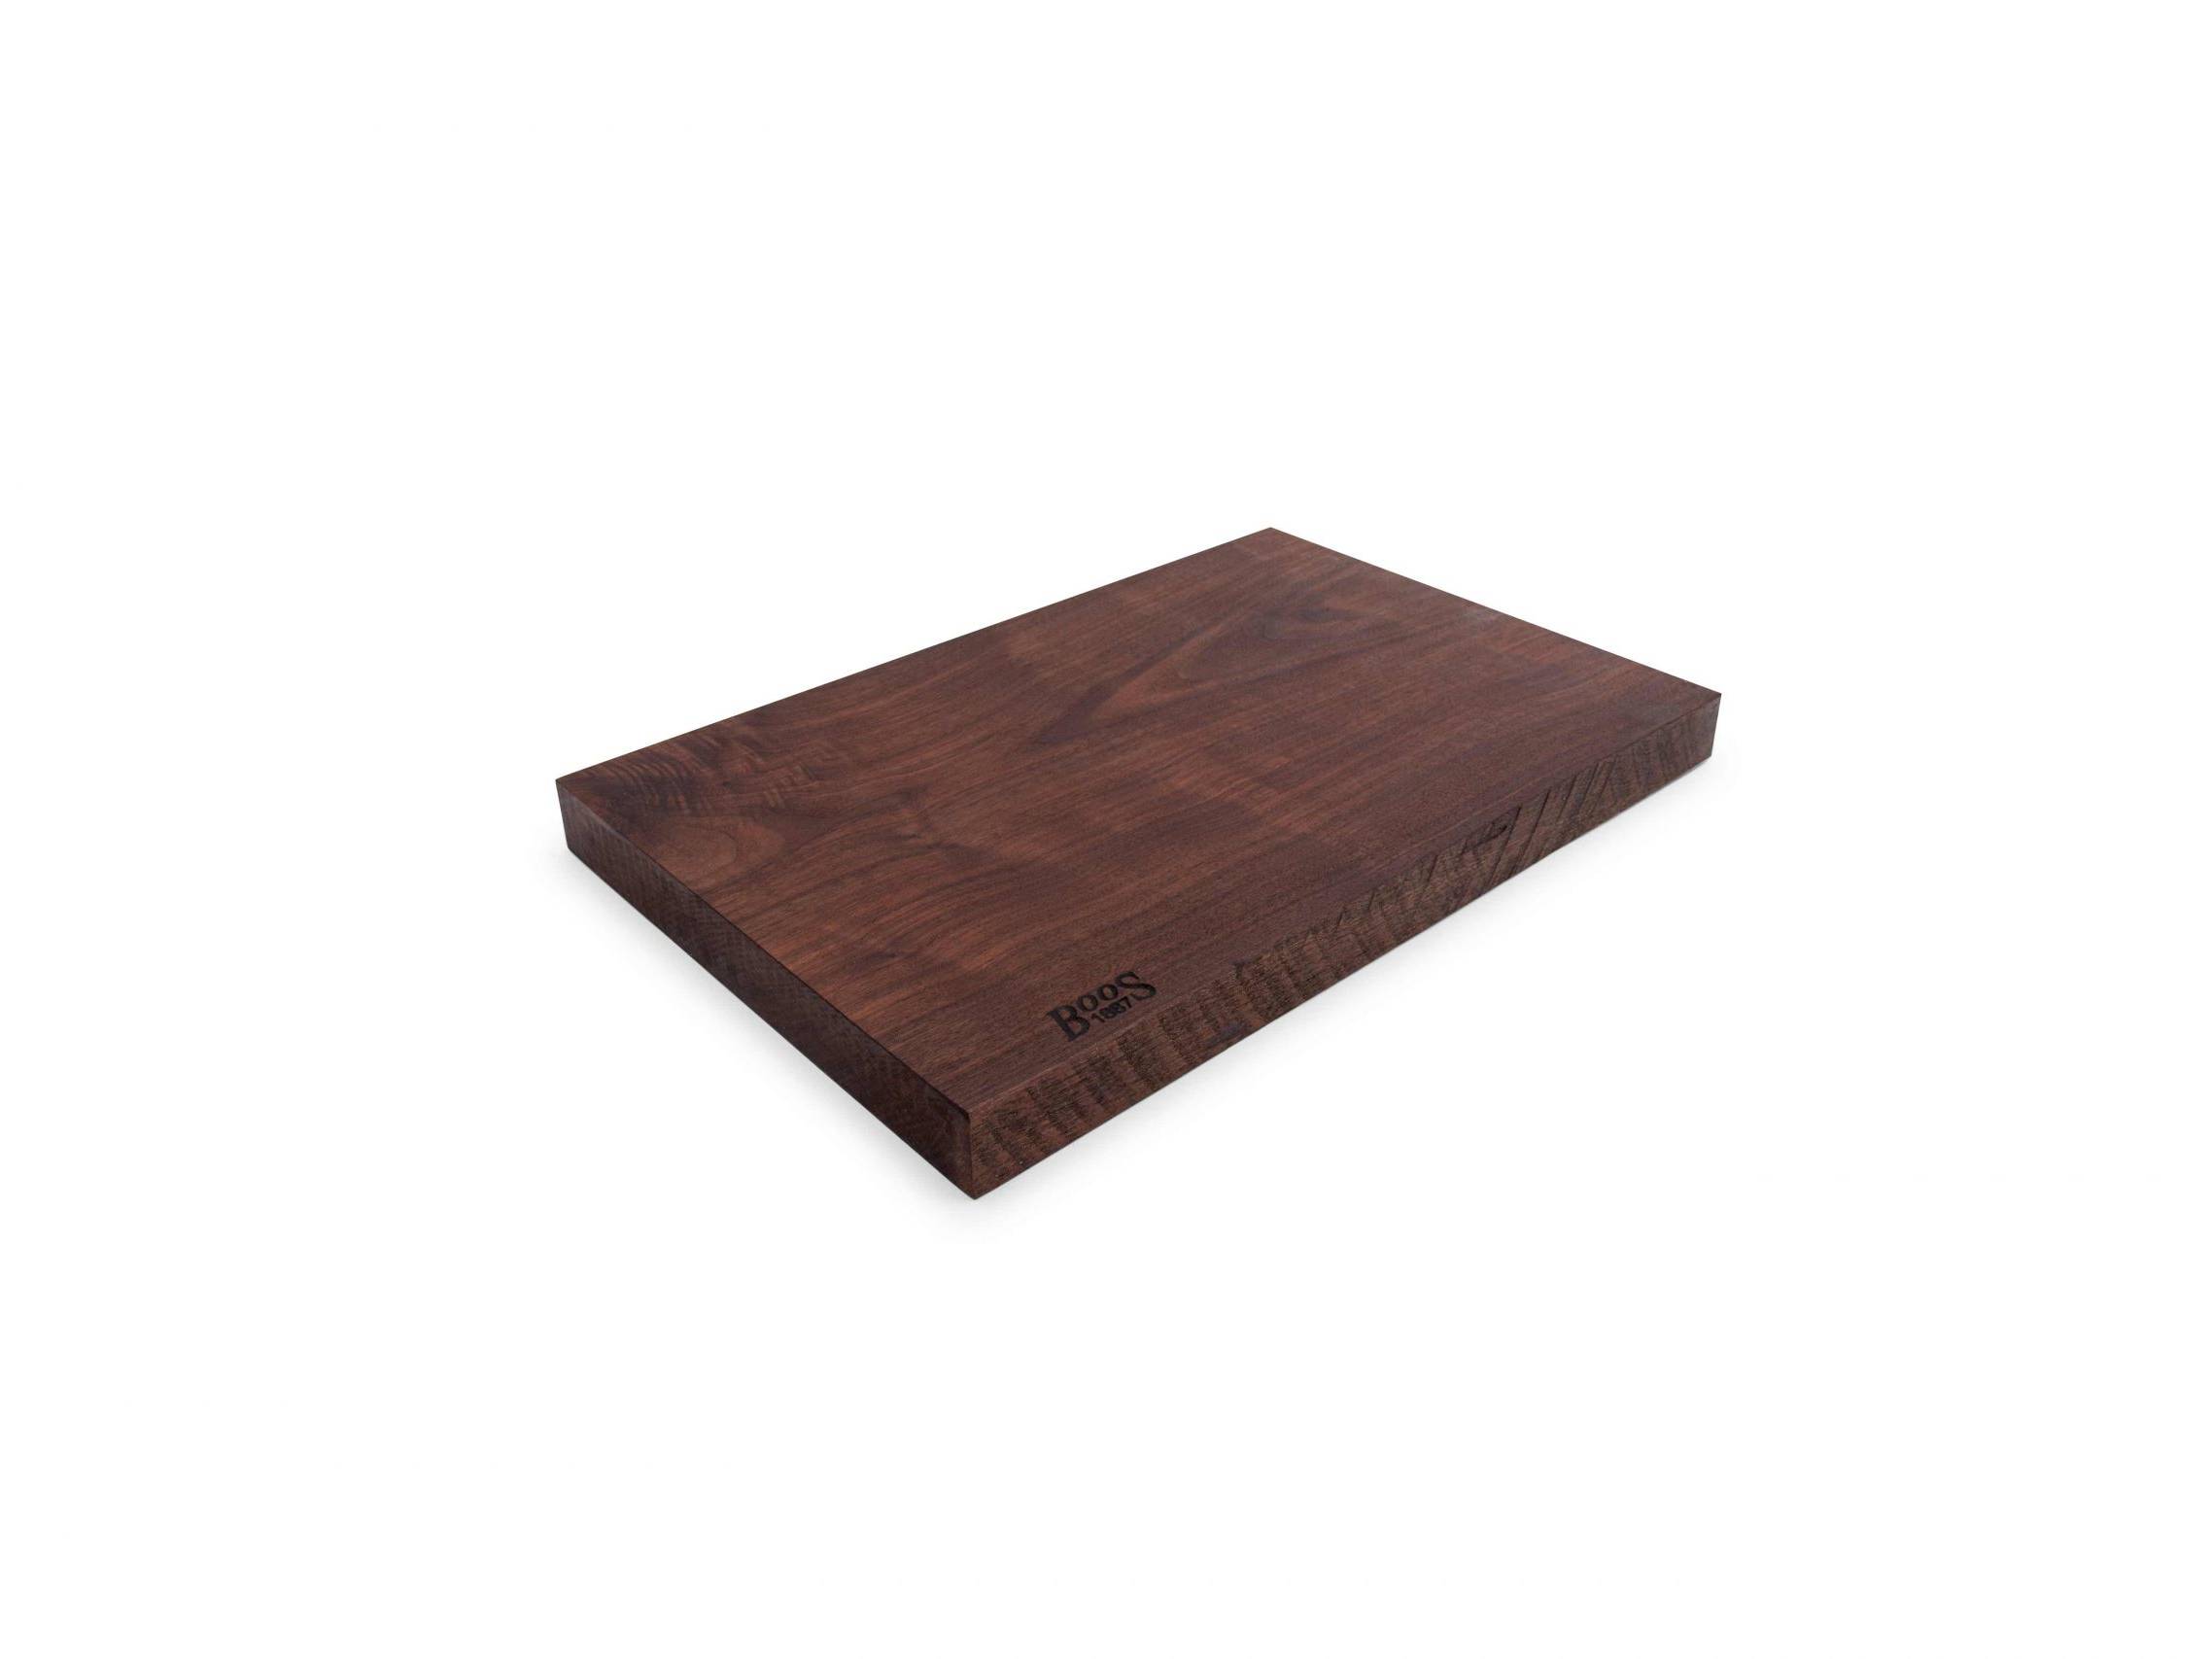 Boos 1887 / Rustic Edge one piece cutting board; Black Walnut; can be used on both sides 11